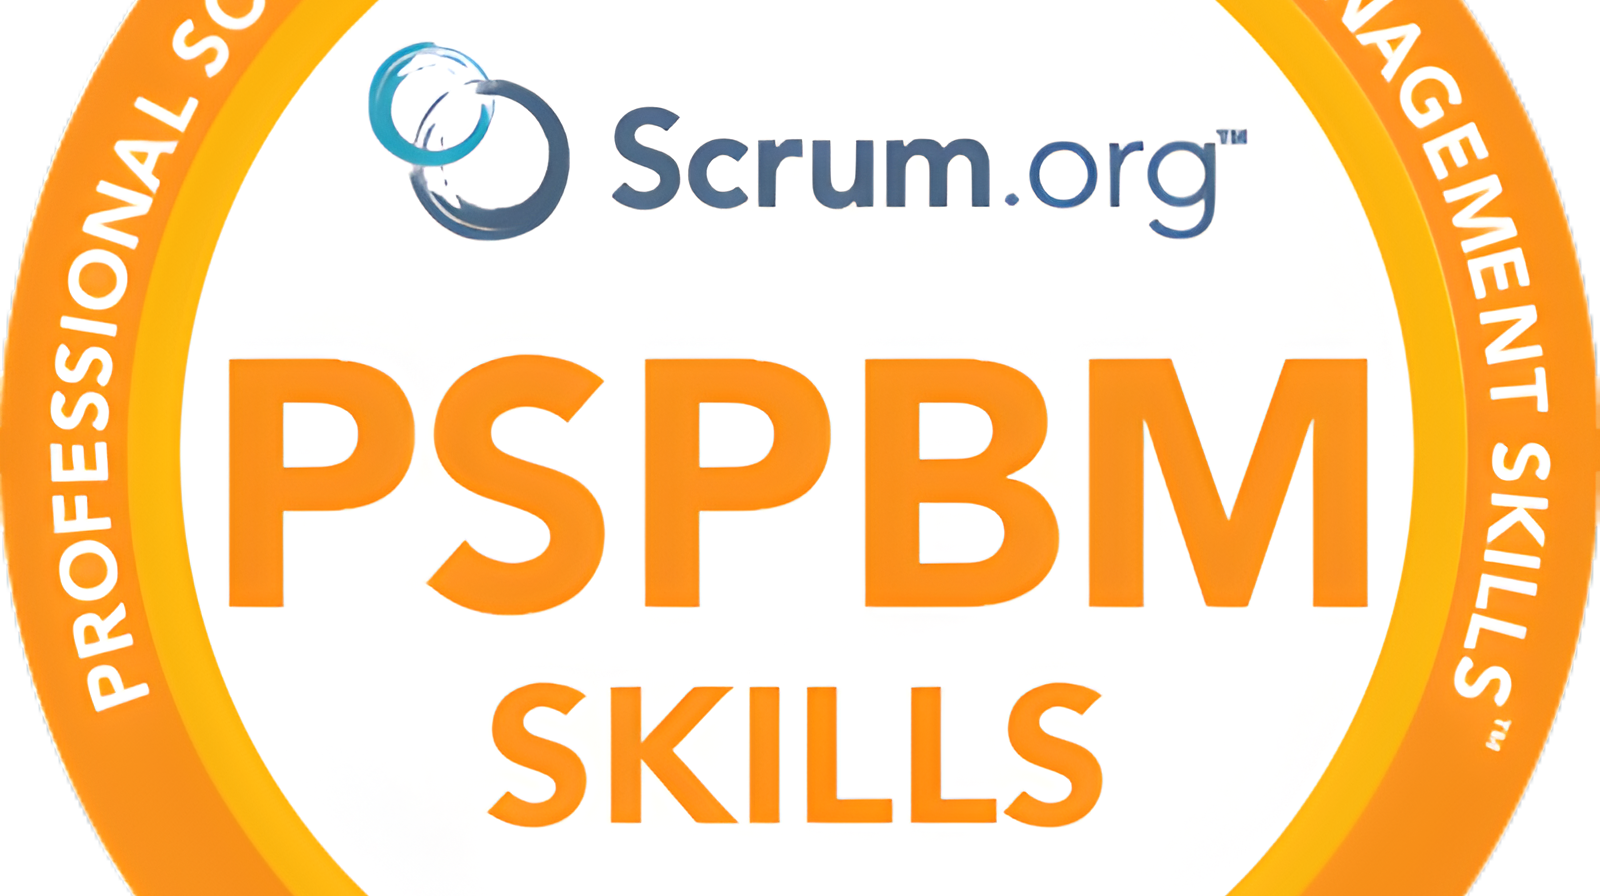 My personal takeaways from the Professional Scrum Product Backlog Management Skills™ (PSPBM) course and assessment